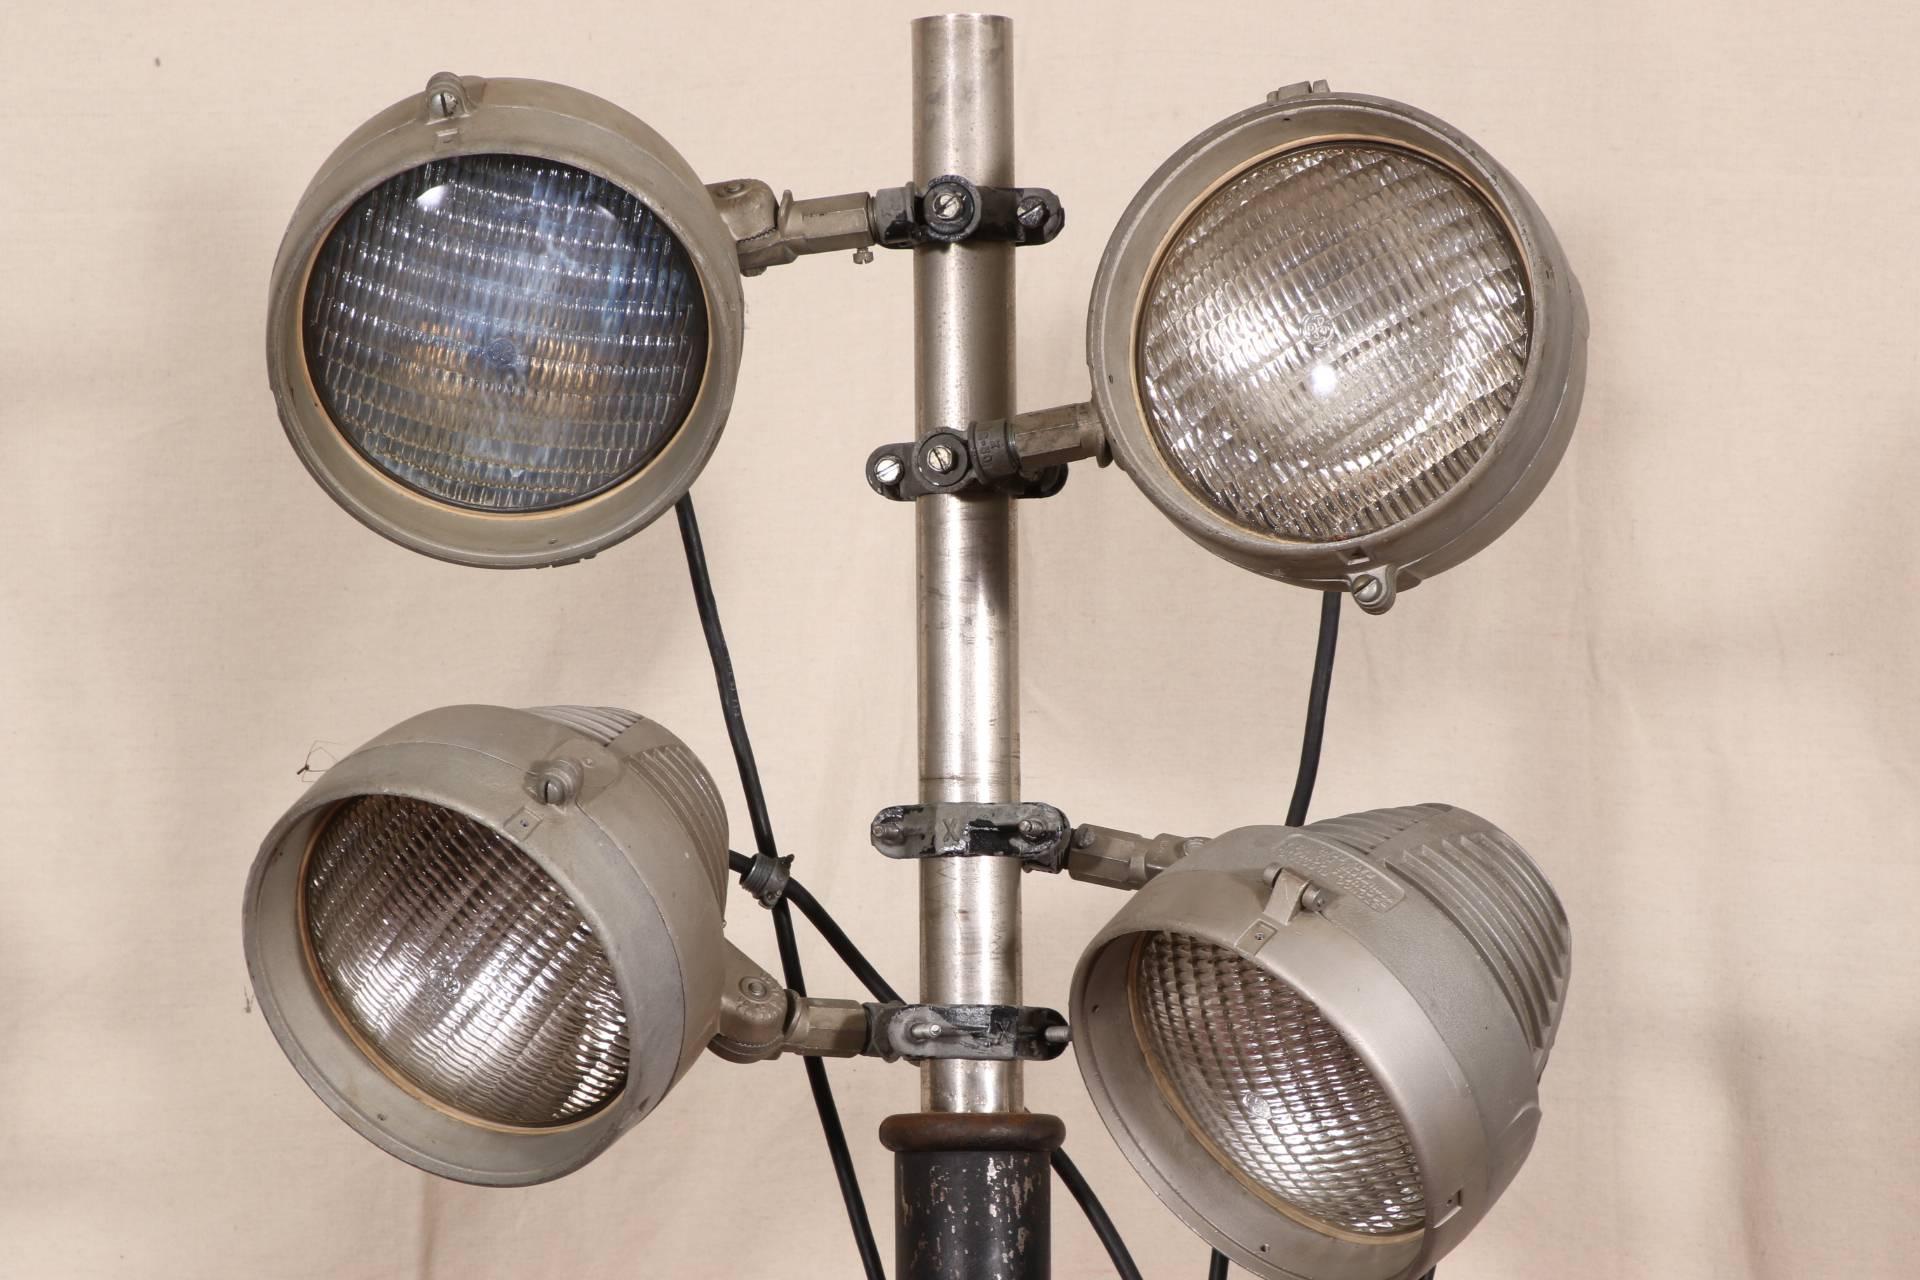 Vintage Industrial Studio Lights by Stongo Electric Products Co., iron tripod base and iron and chrome support with four gray metal adjustable lights- labeled Stongo Electric Products Company Kenilworth NJ, with GE bulbs.

Condition: expected wear